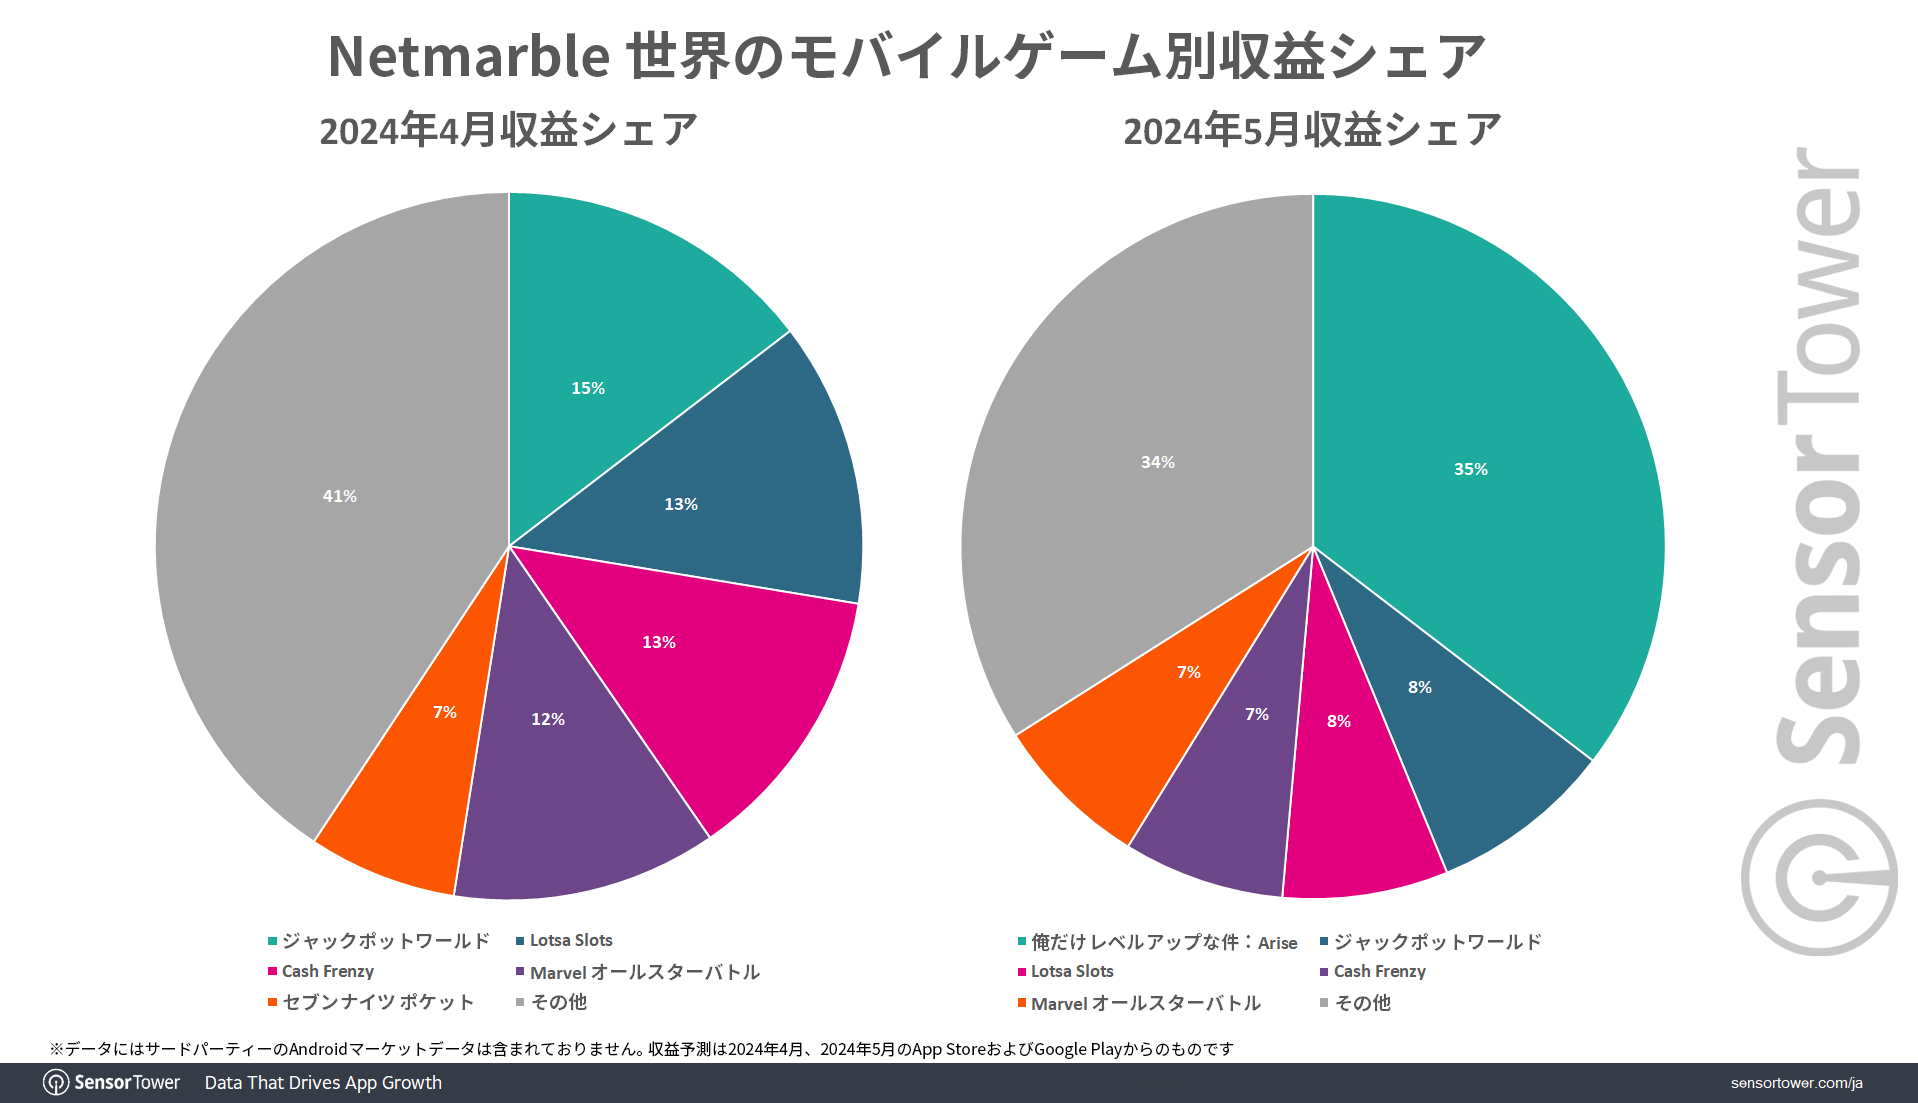 Revenue-Share-by-game-in-global Netmarble